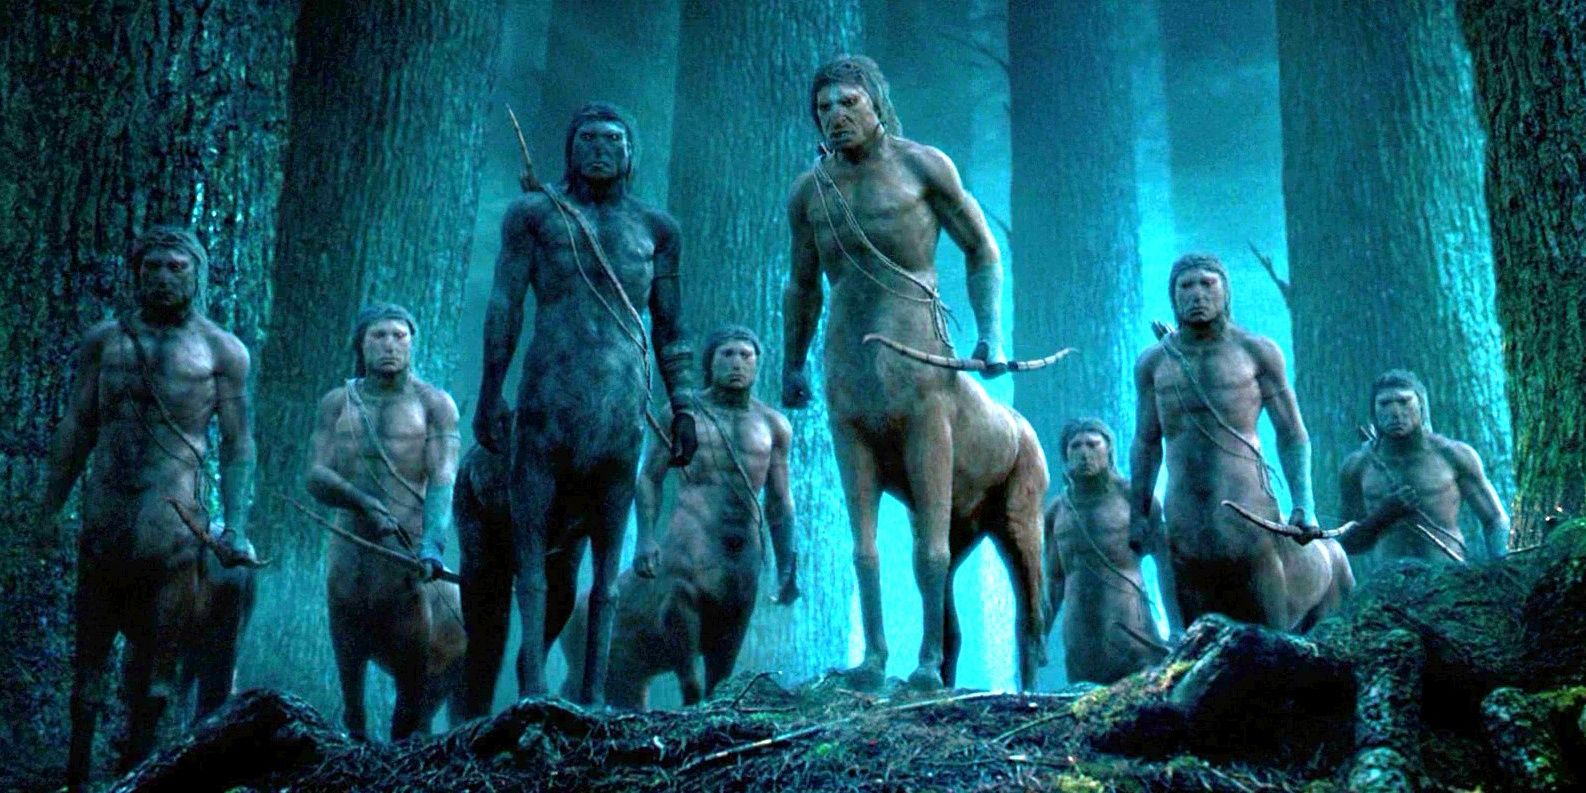 The centaurs in Harry Potter